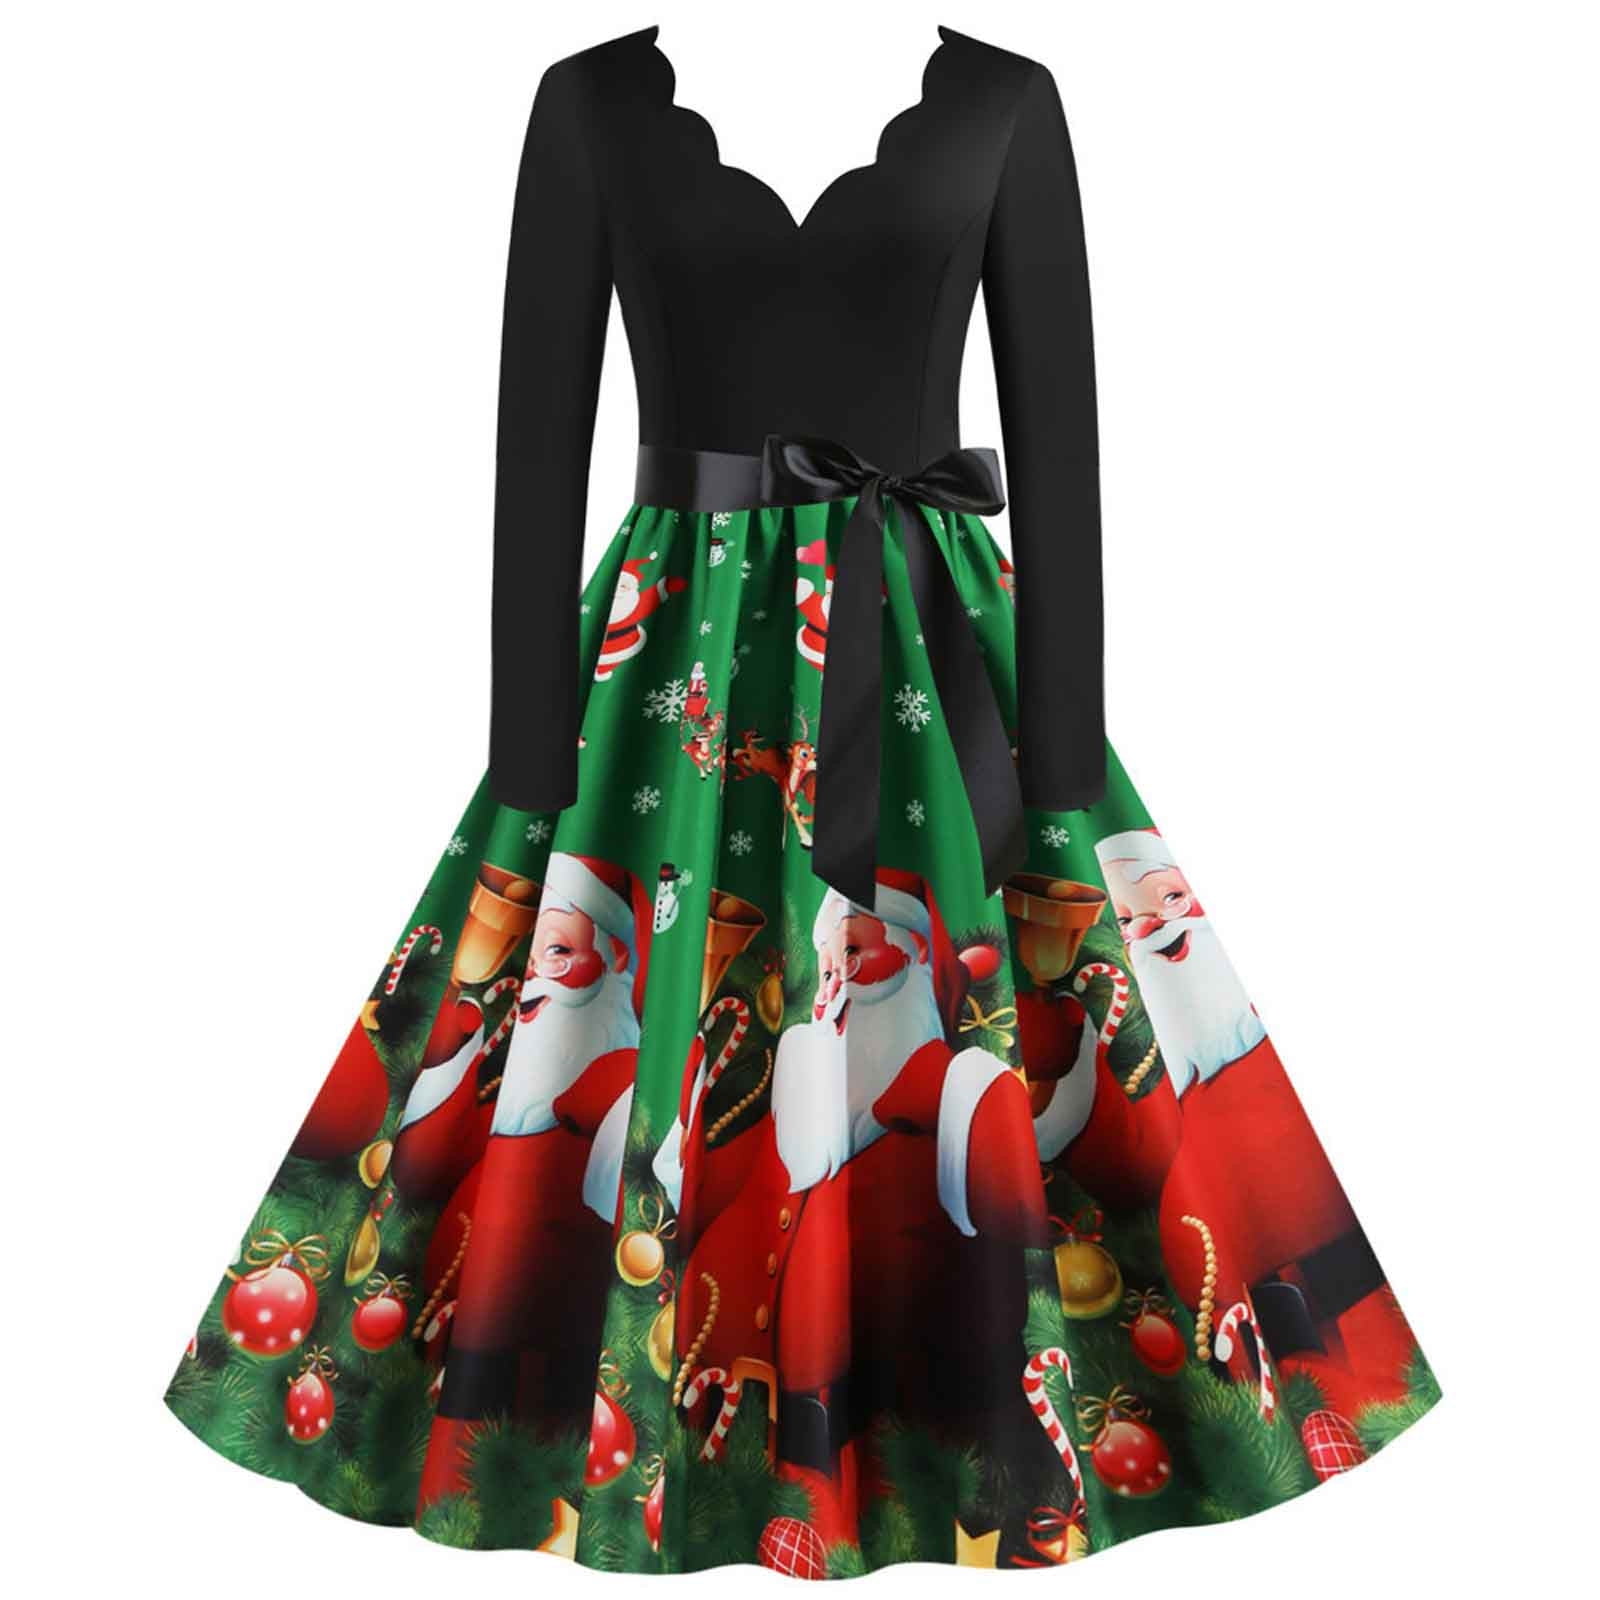 Line Xmas Printed Swing Hepburn Party Dress Christmas Dress for Women 50s Vintage Short Sleeve Lace Retro Cocktail A 